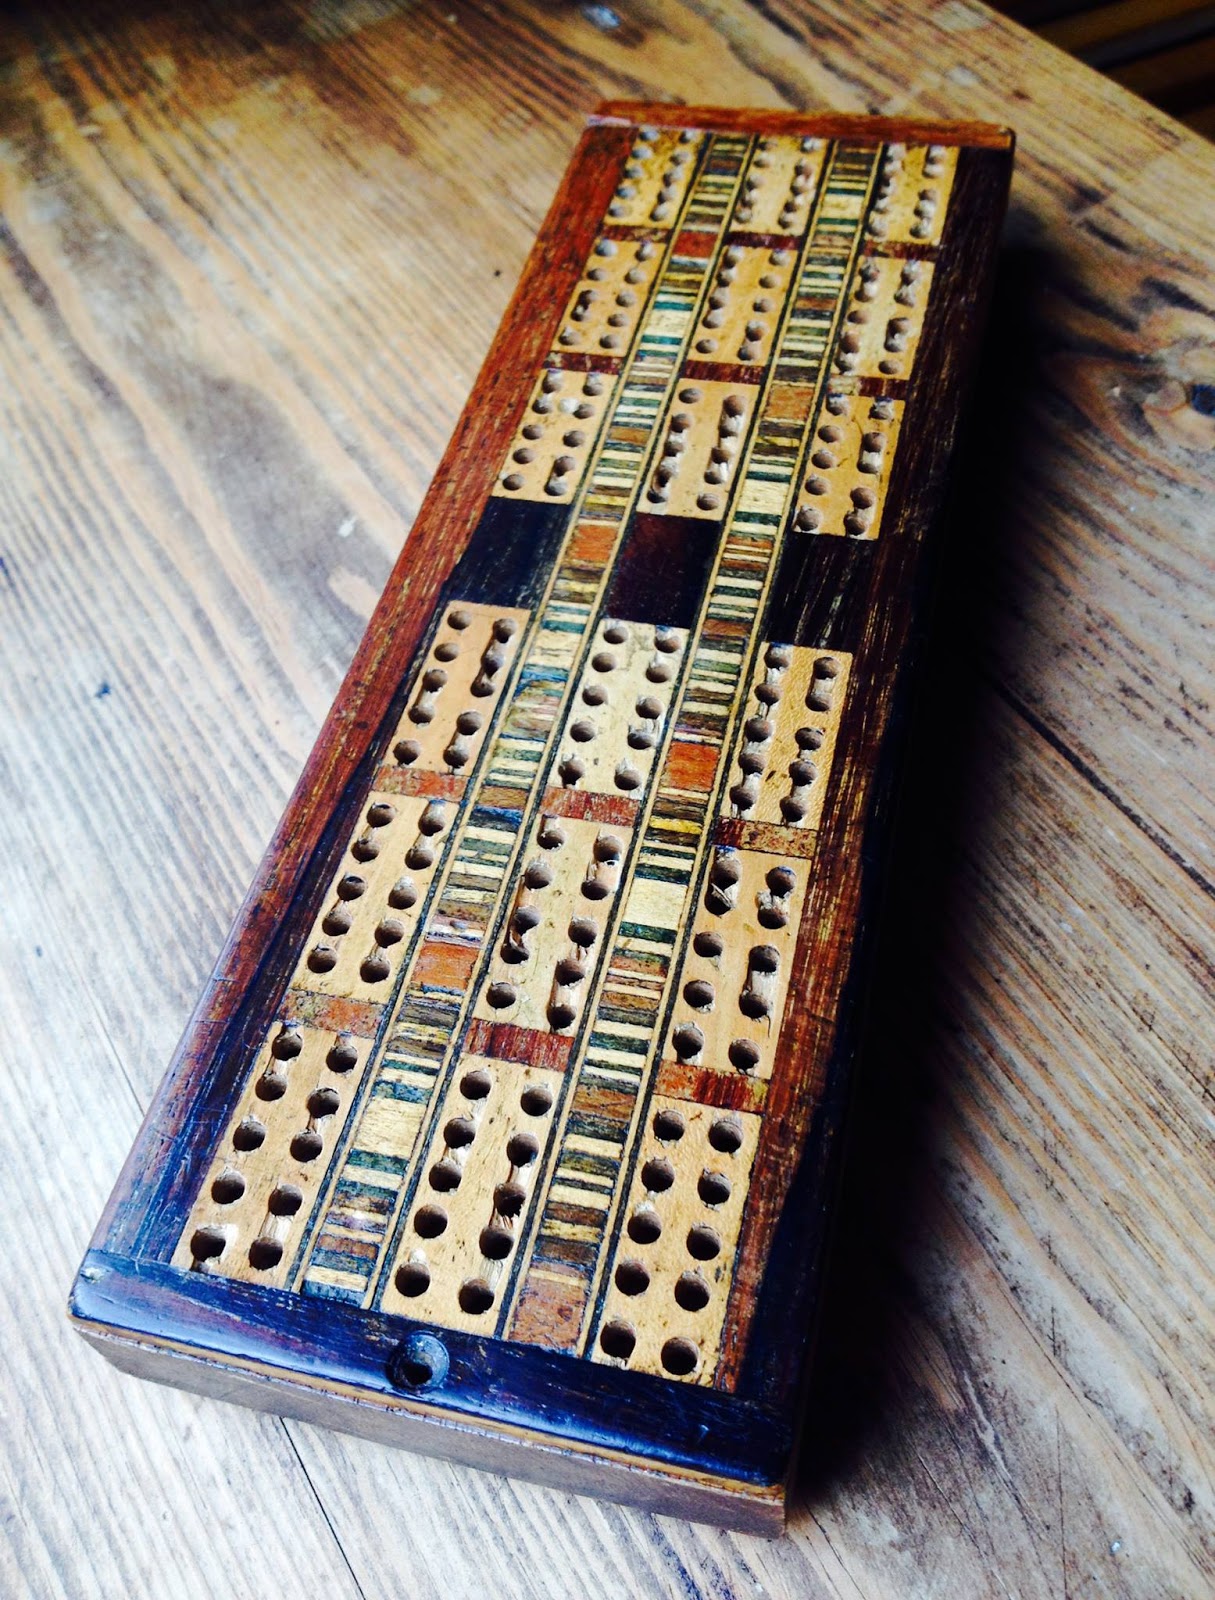 New Vintage Style Wooden Cribbage Board & Pegs Crib Board For Pubs Clubs Bar 